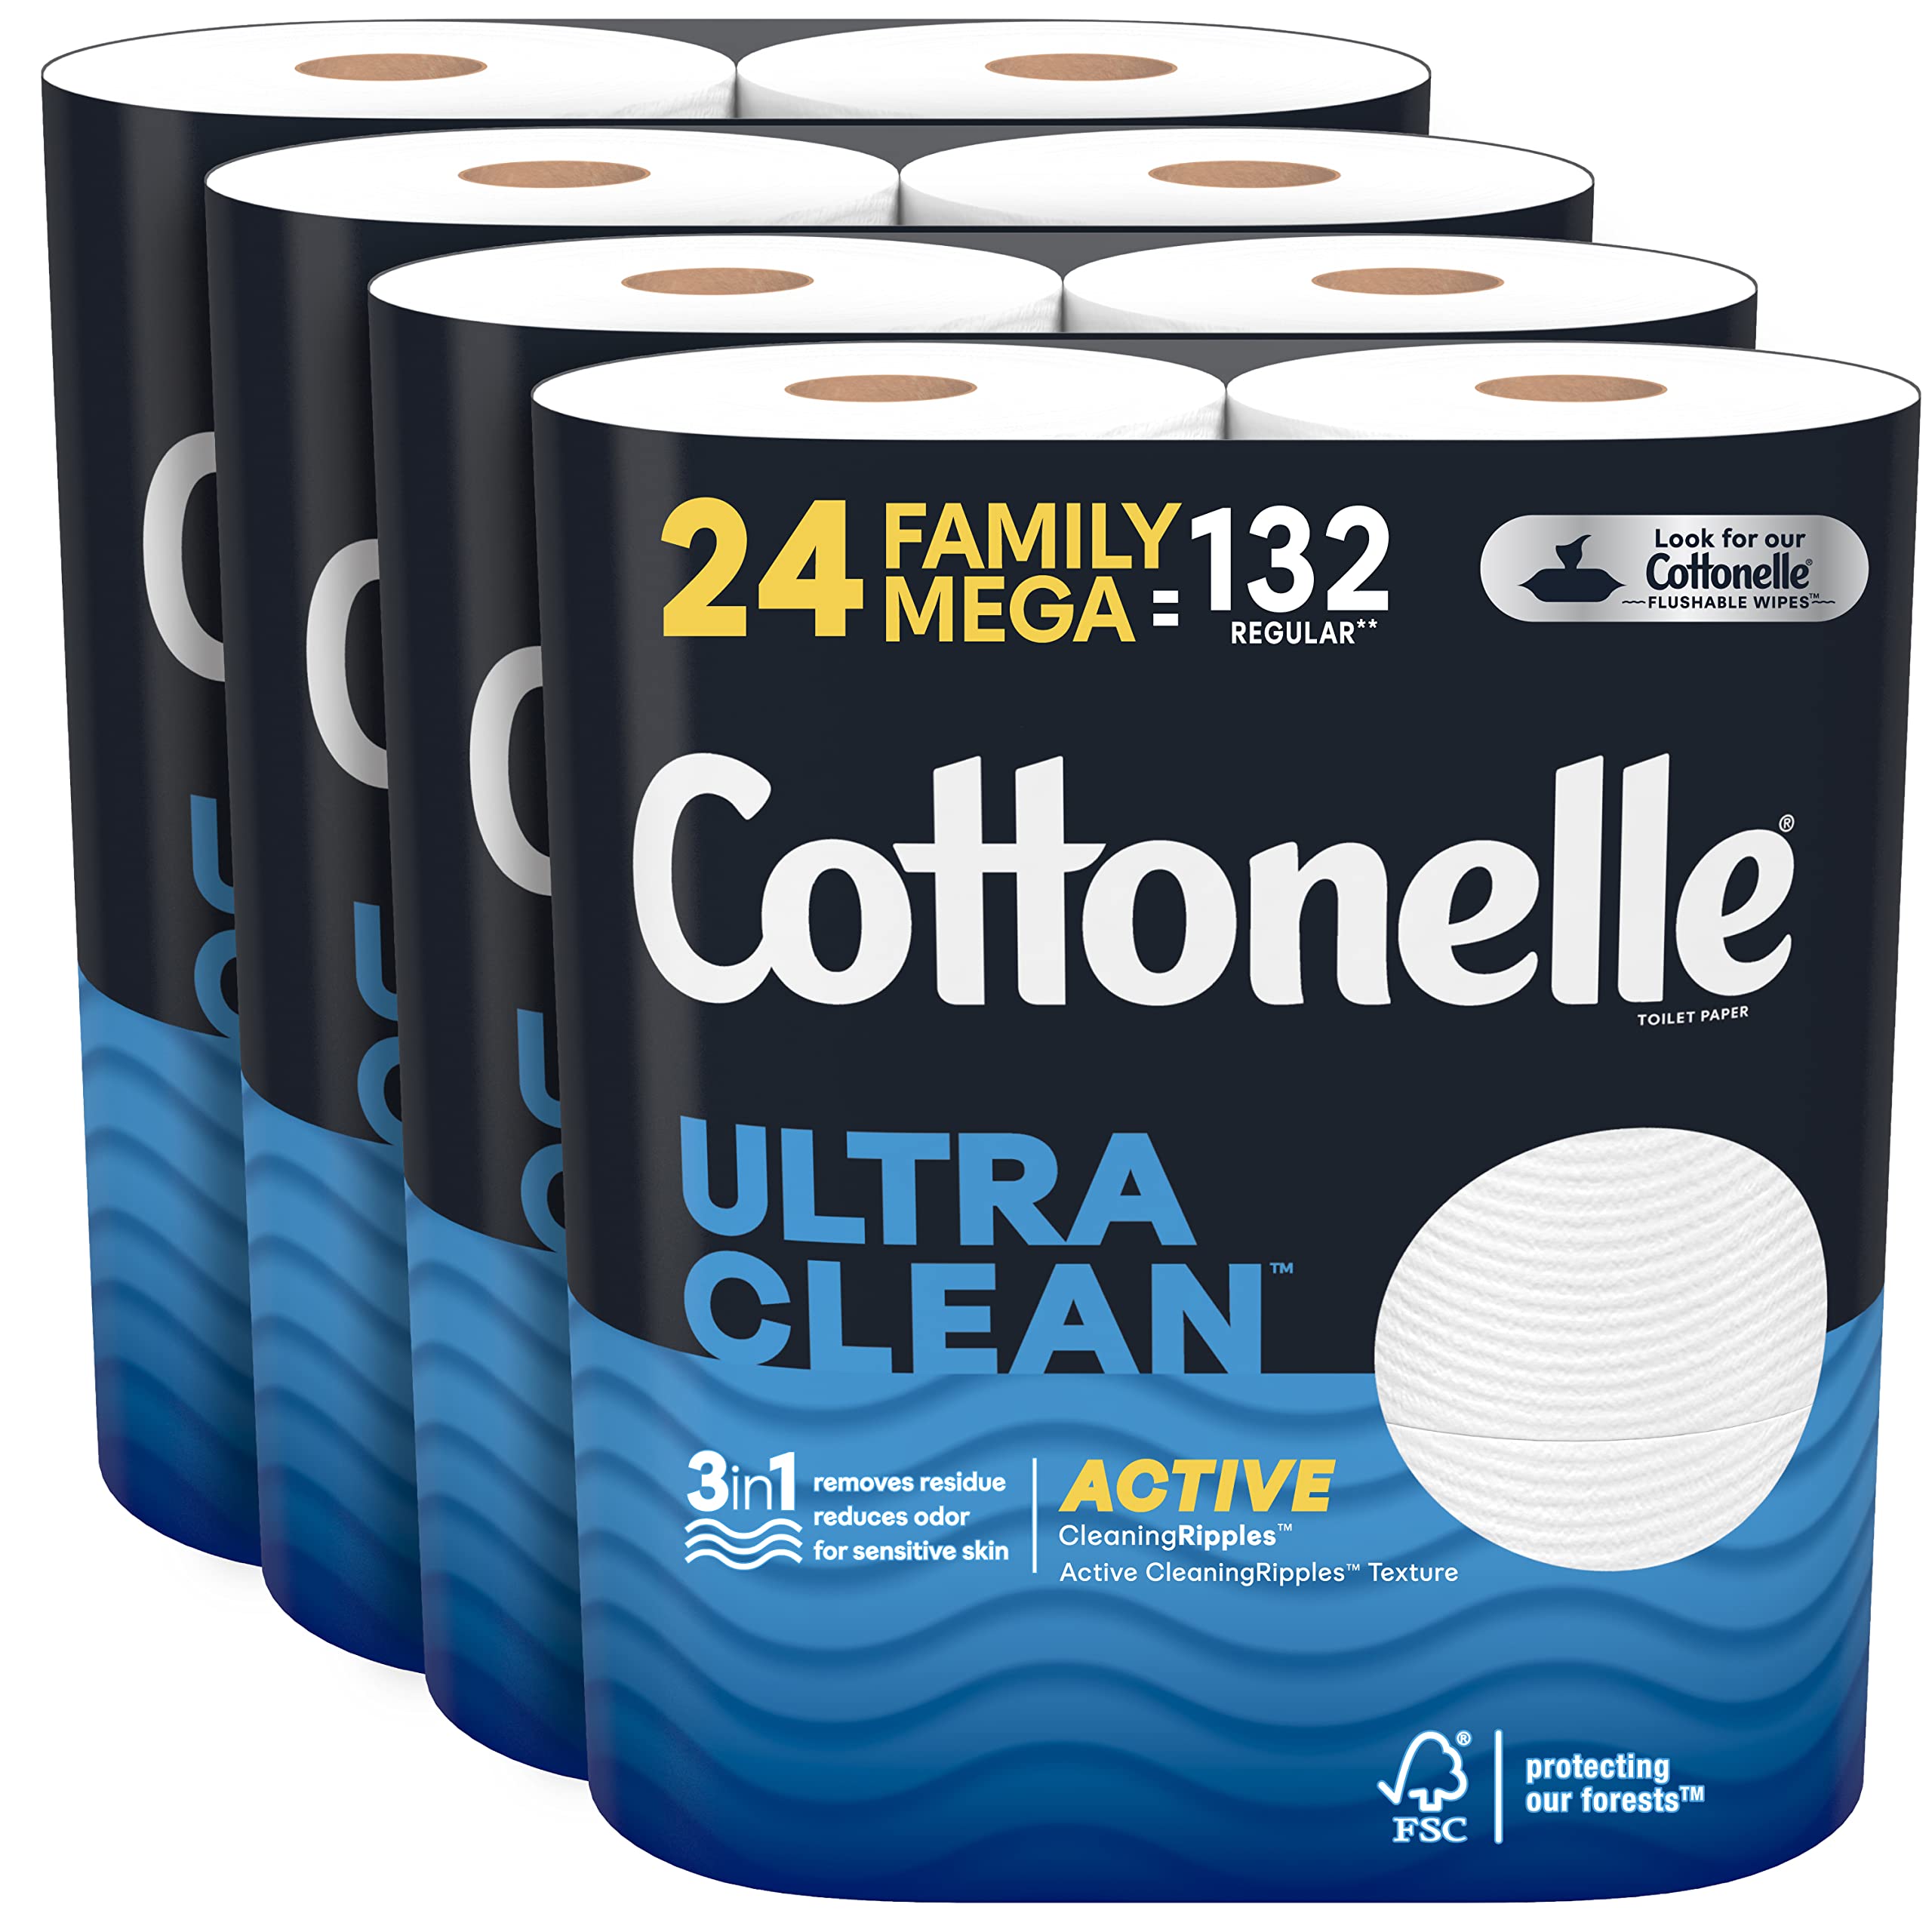 Book Cover Cottonelle Ultra Clean Toilet Paper with Active CleaningRipples Texture, Strong Bath Tissue, 24 Family Mega Rolls (24 Family Mega Rolls = 132 Regular Rolls) (4 Packs of 6), 388 Sheets per Roll 6 Count (Pack of 4) Toilet Paper